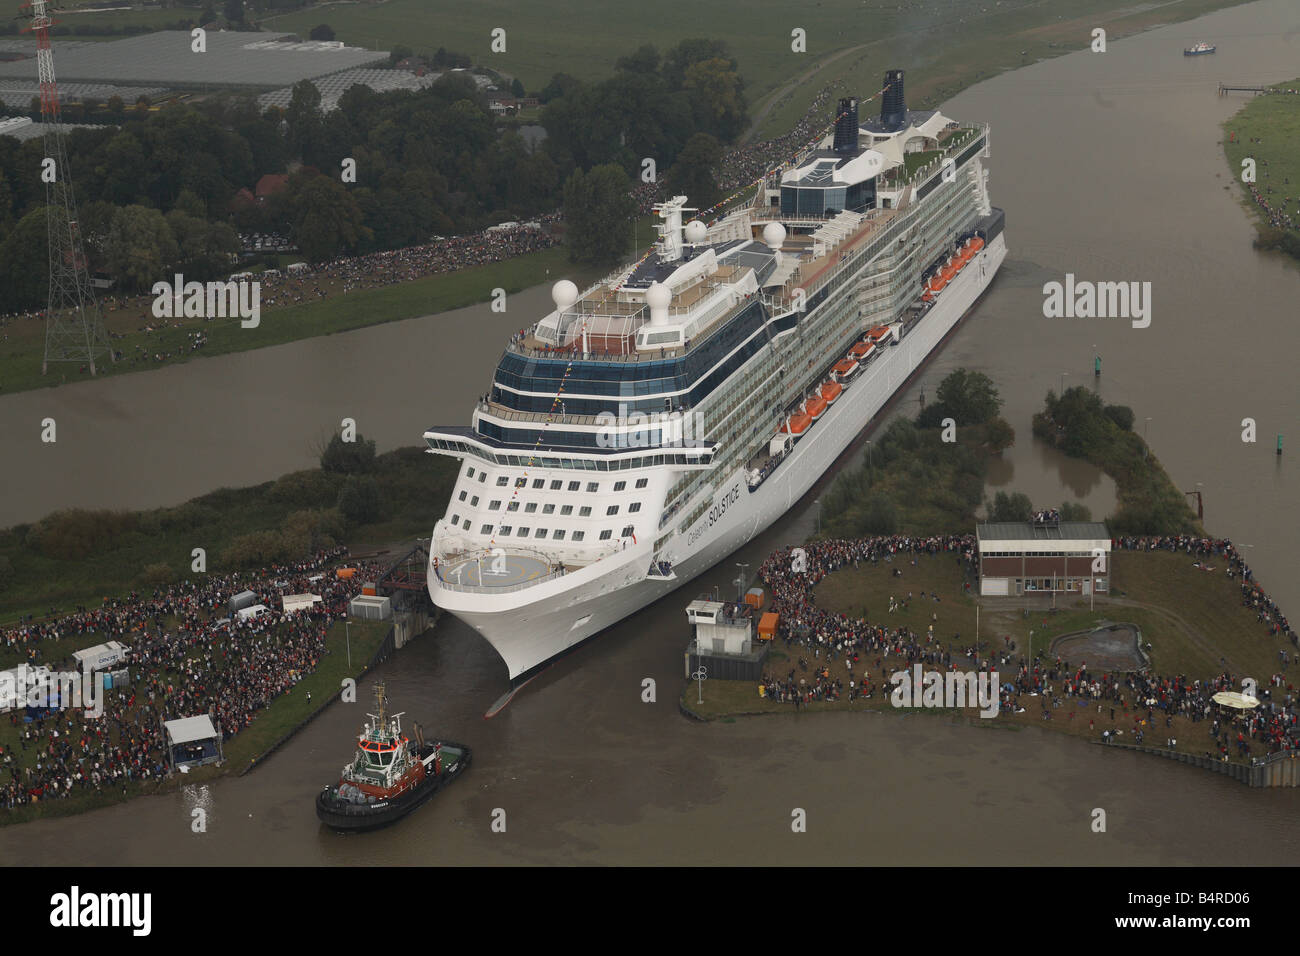 Celebrity Solstice squeezes out of the lock at the Papenburg shipyard where she was built. Stock Photo